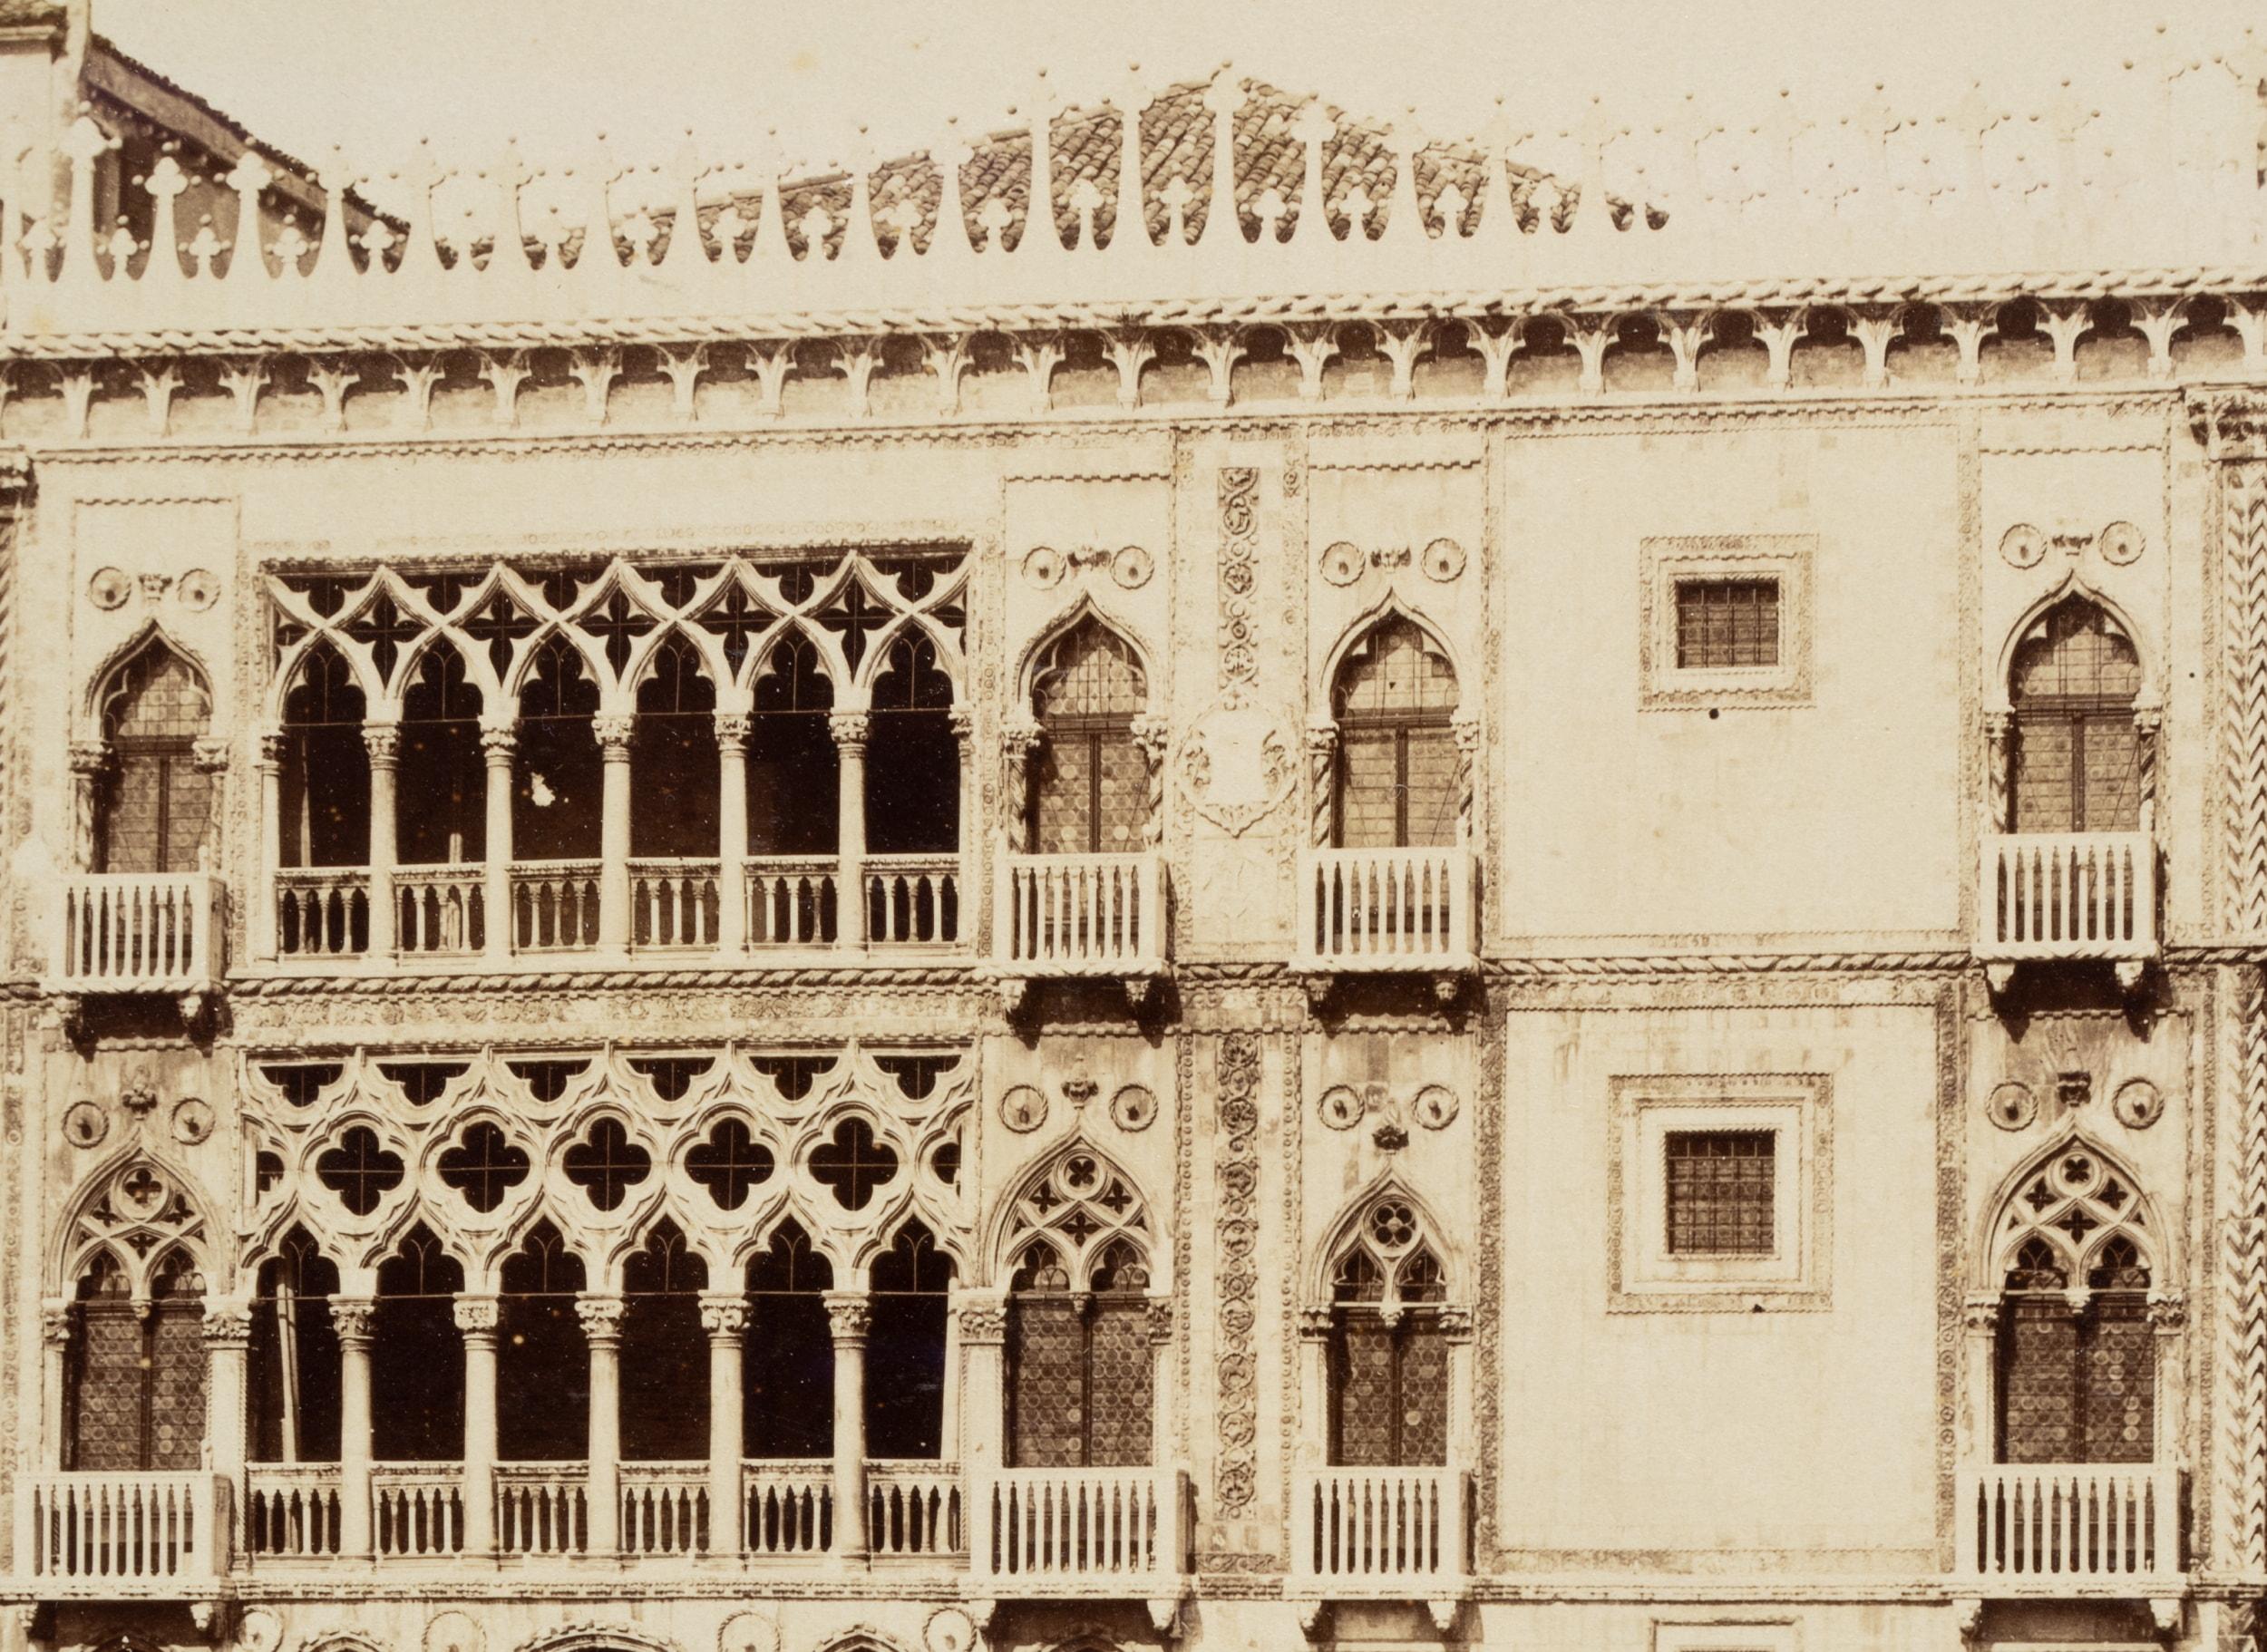 Fratelli Alinari (19th century) Circle: Ansicht des Palazzos Casa d'Oro am Canal Grande Venedig, c. 1880, albumen paper print

Technique: albumen paper print, mounted on Cardboard

Inscription: Lower middle inscribed on the support: 